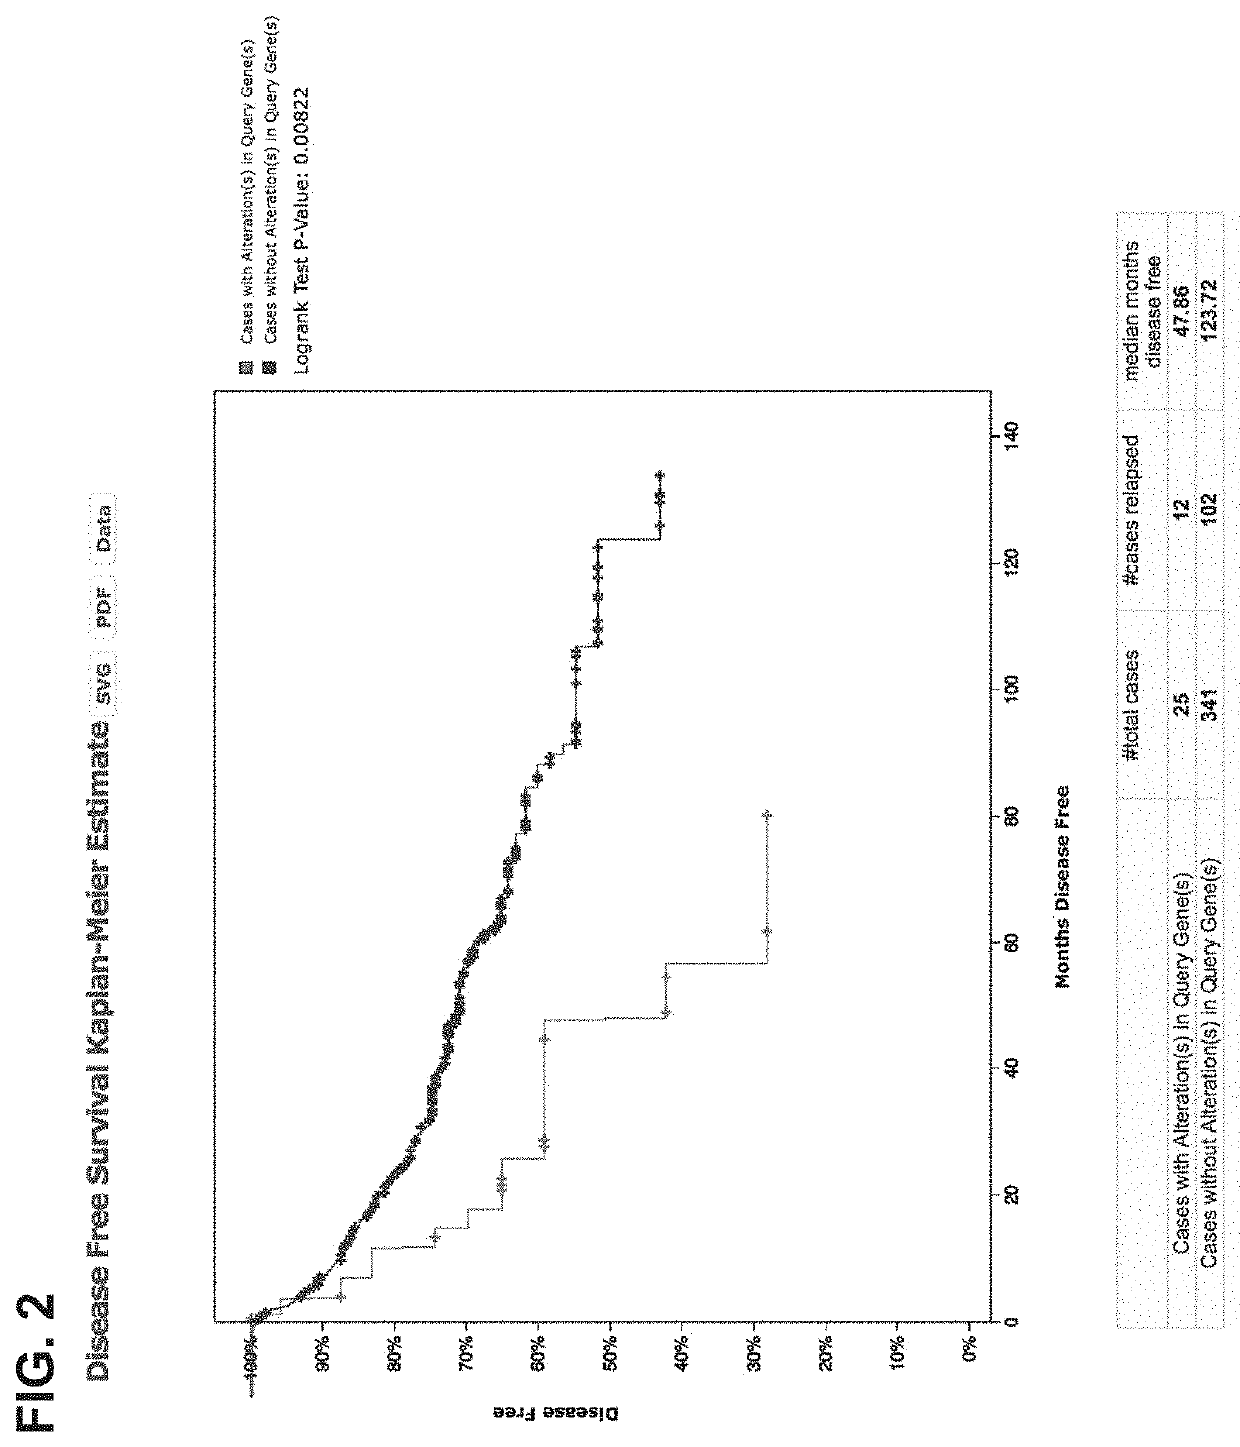 Treatment of cancer by risk stratification of patients based on comordidities